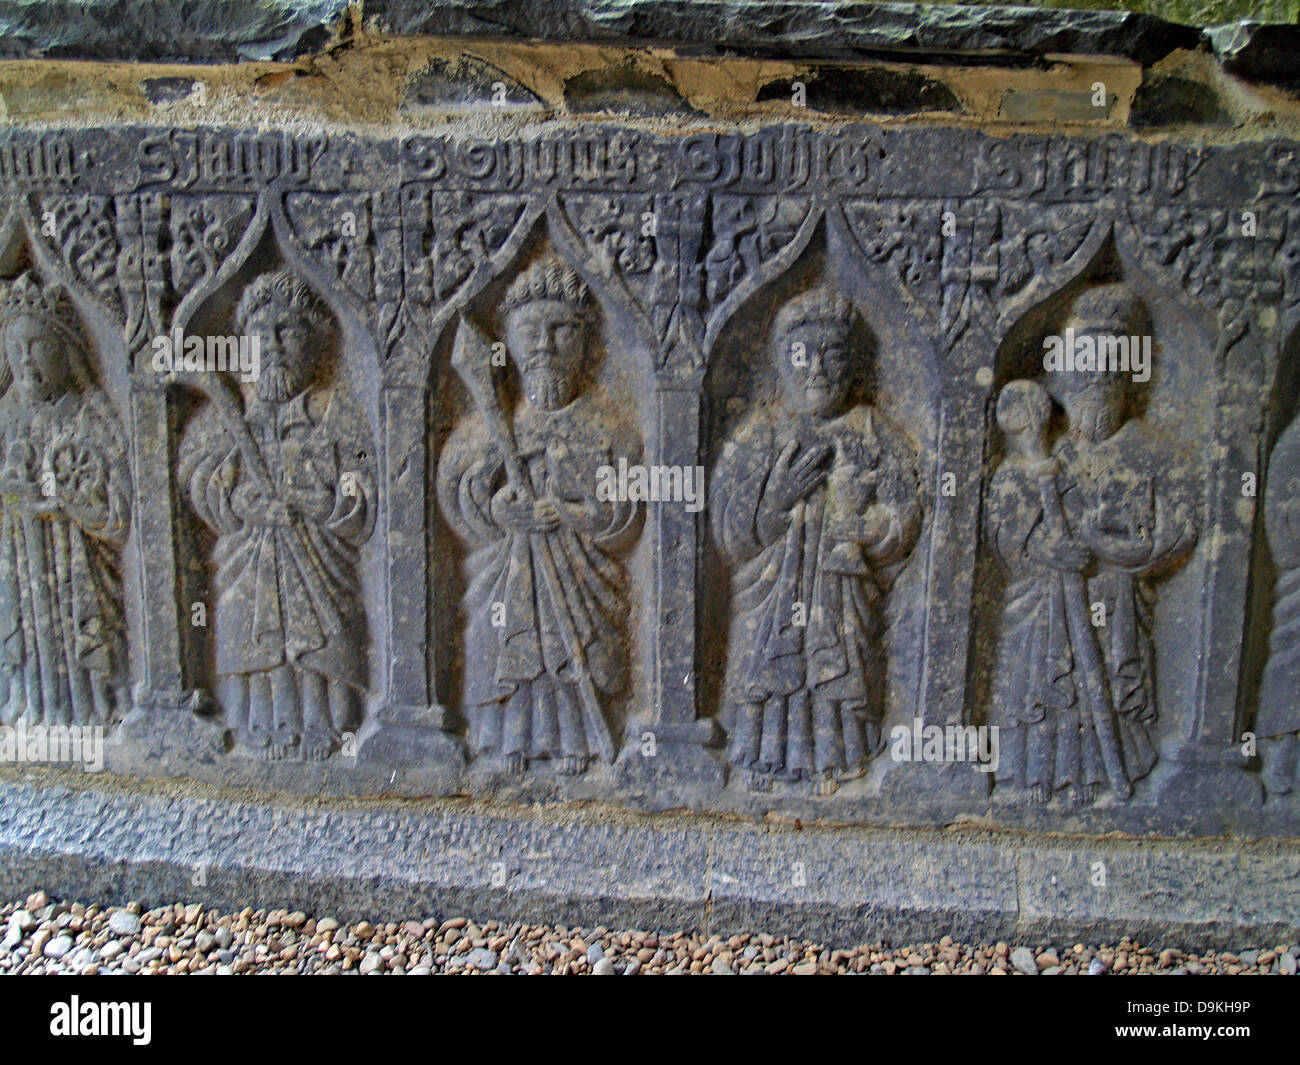 Tomb weepers carved on a tomb chest,Rock of Cashel,Ireland Stock Photo